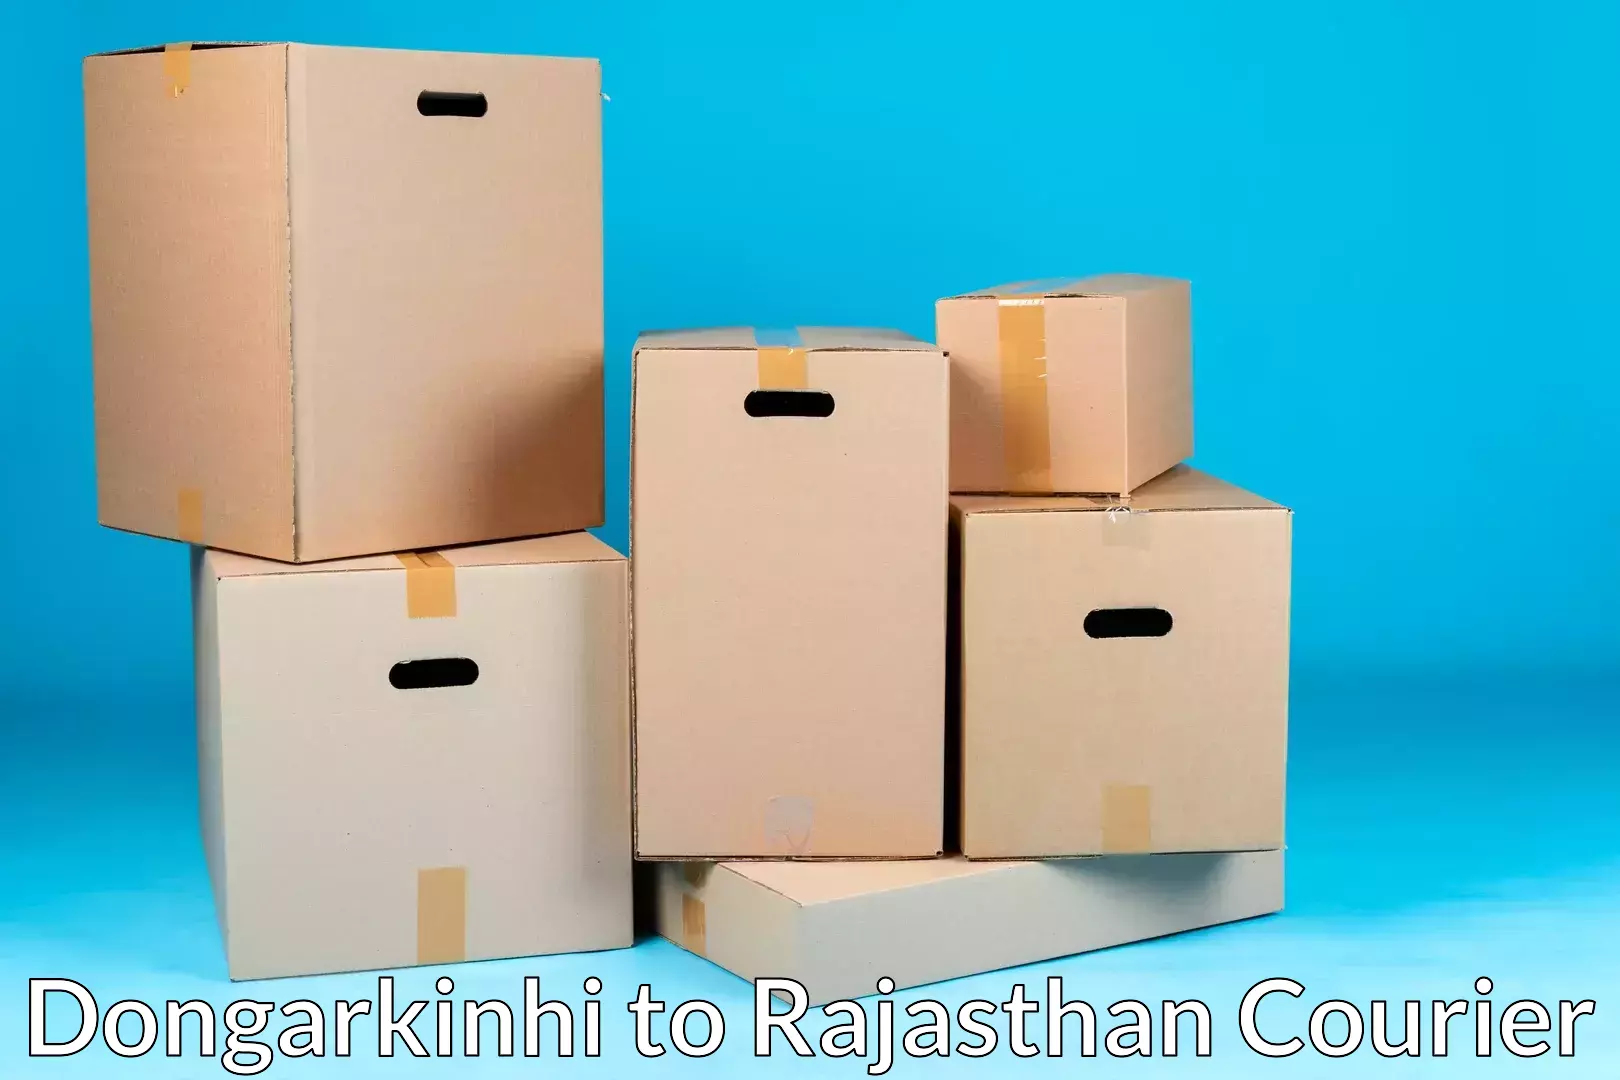 Moving and storage services Dongarkinhi to Deogarh Rajsamand